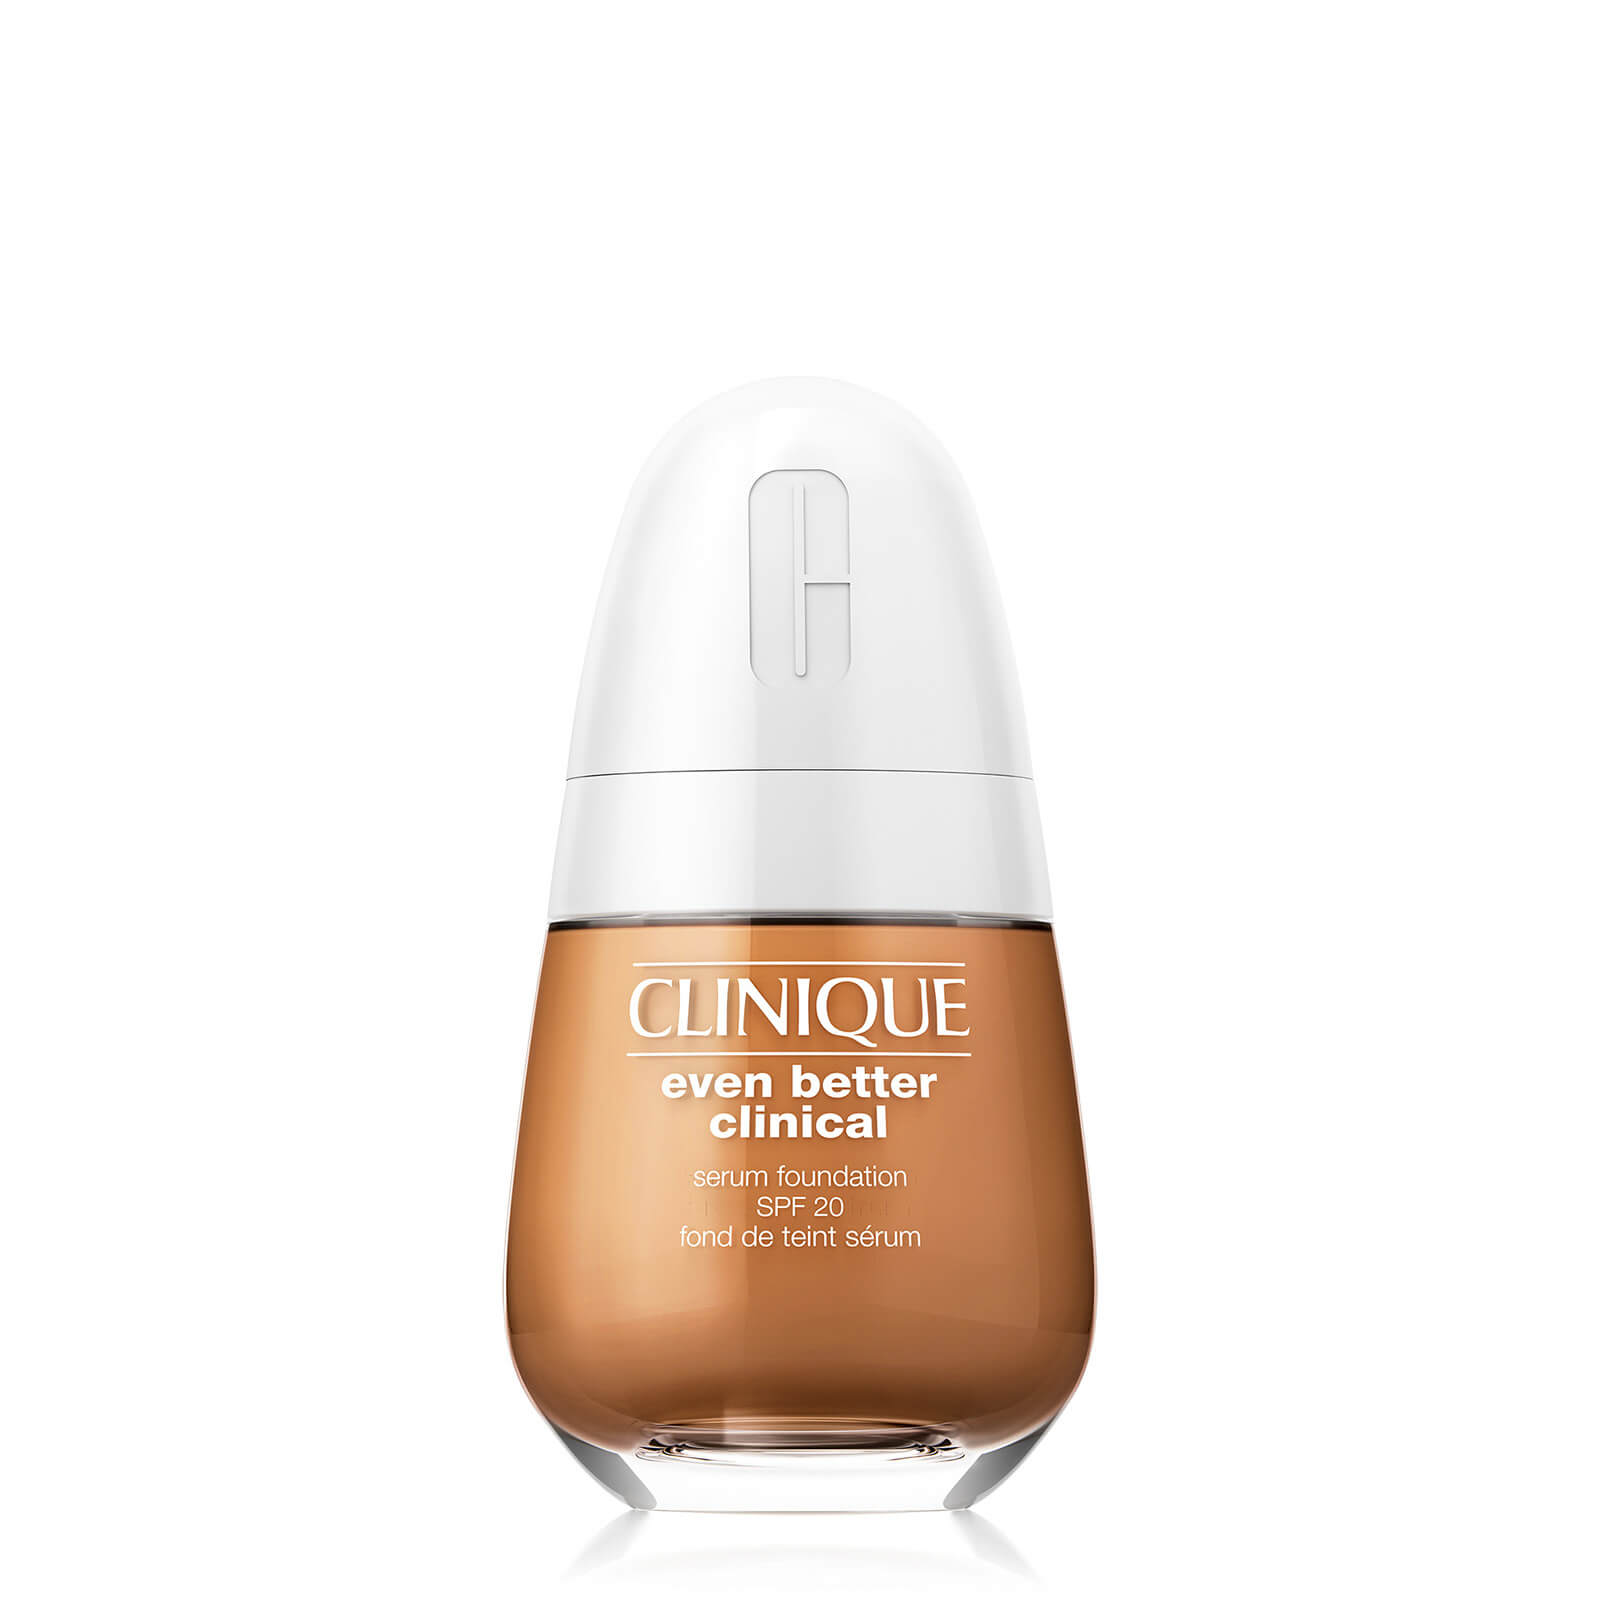 Clinique Even Better Clinical Serum Foundation SPF20 30ml (Various Shades) - Amber